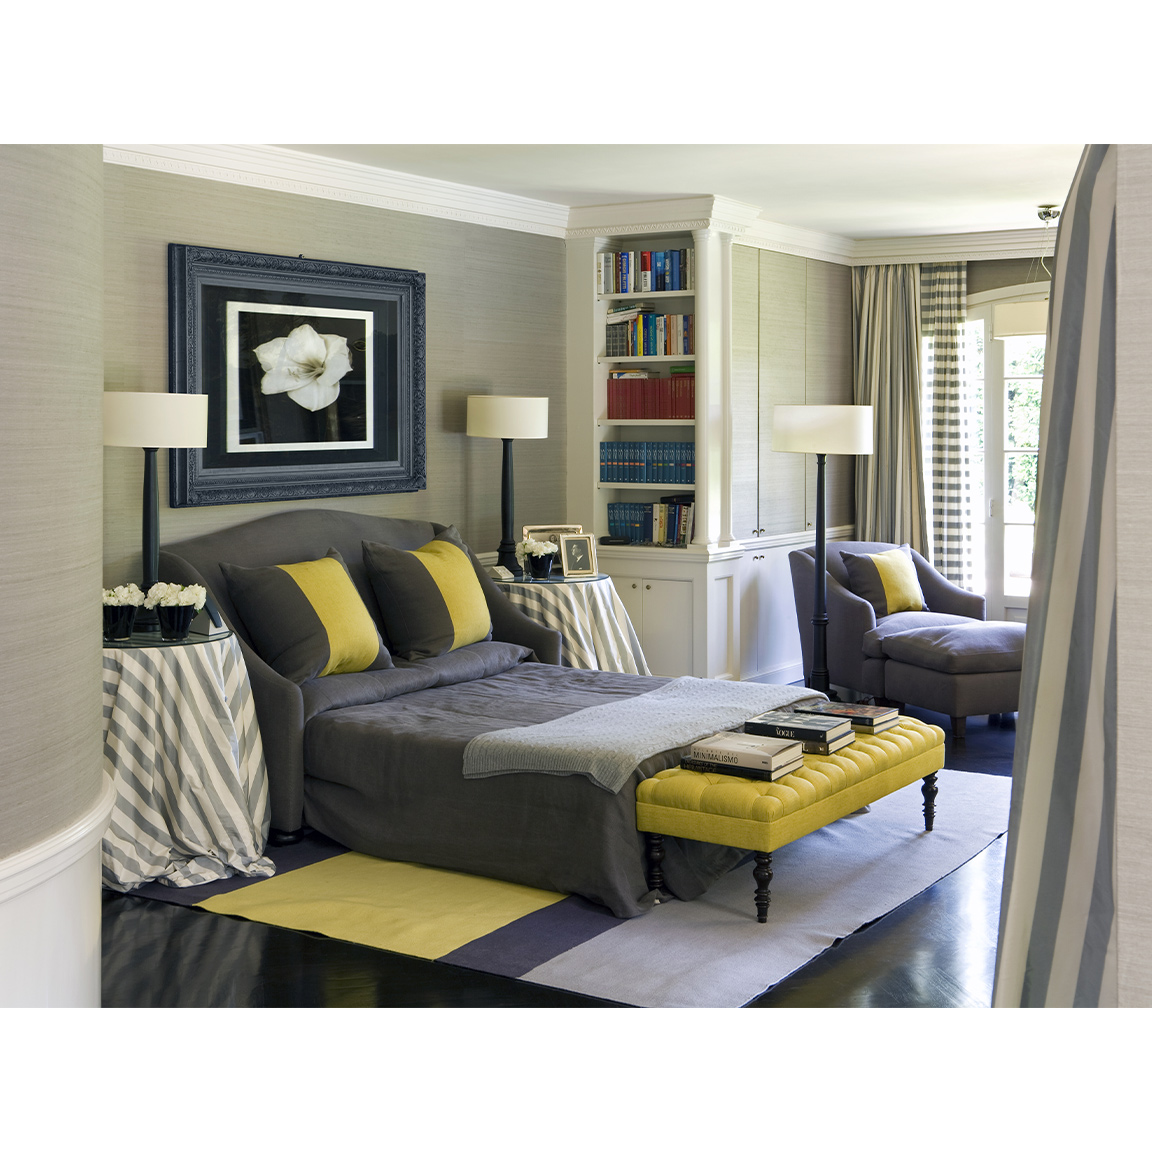 bedroom with grey and yellow bed and armchair